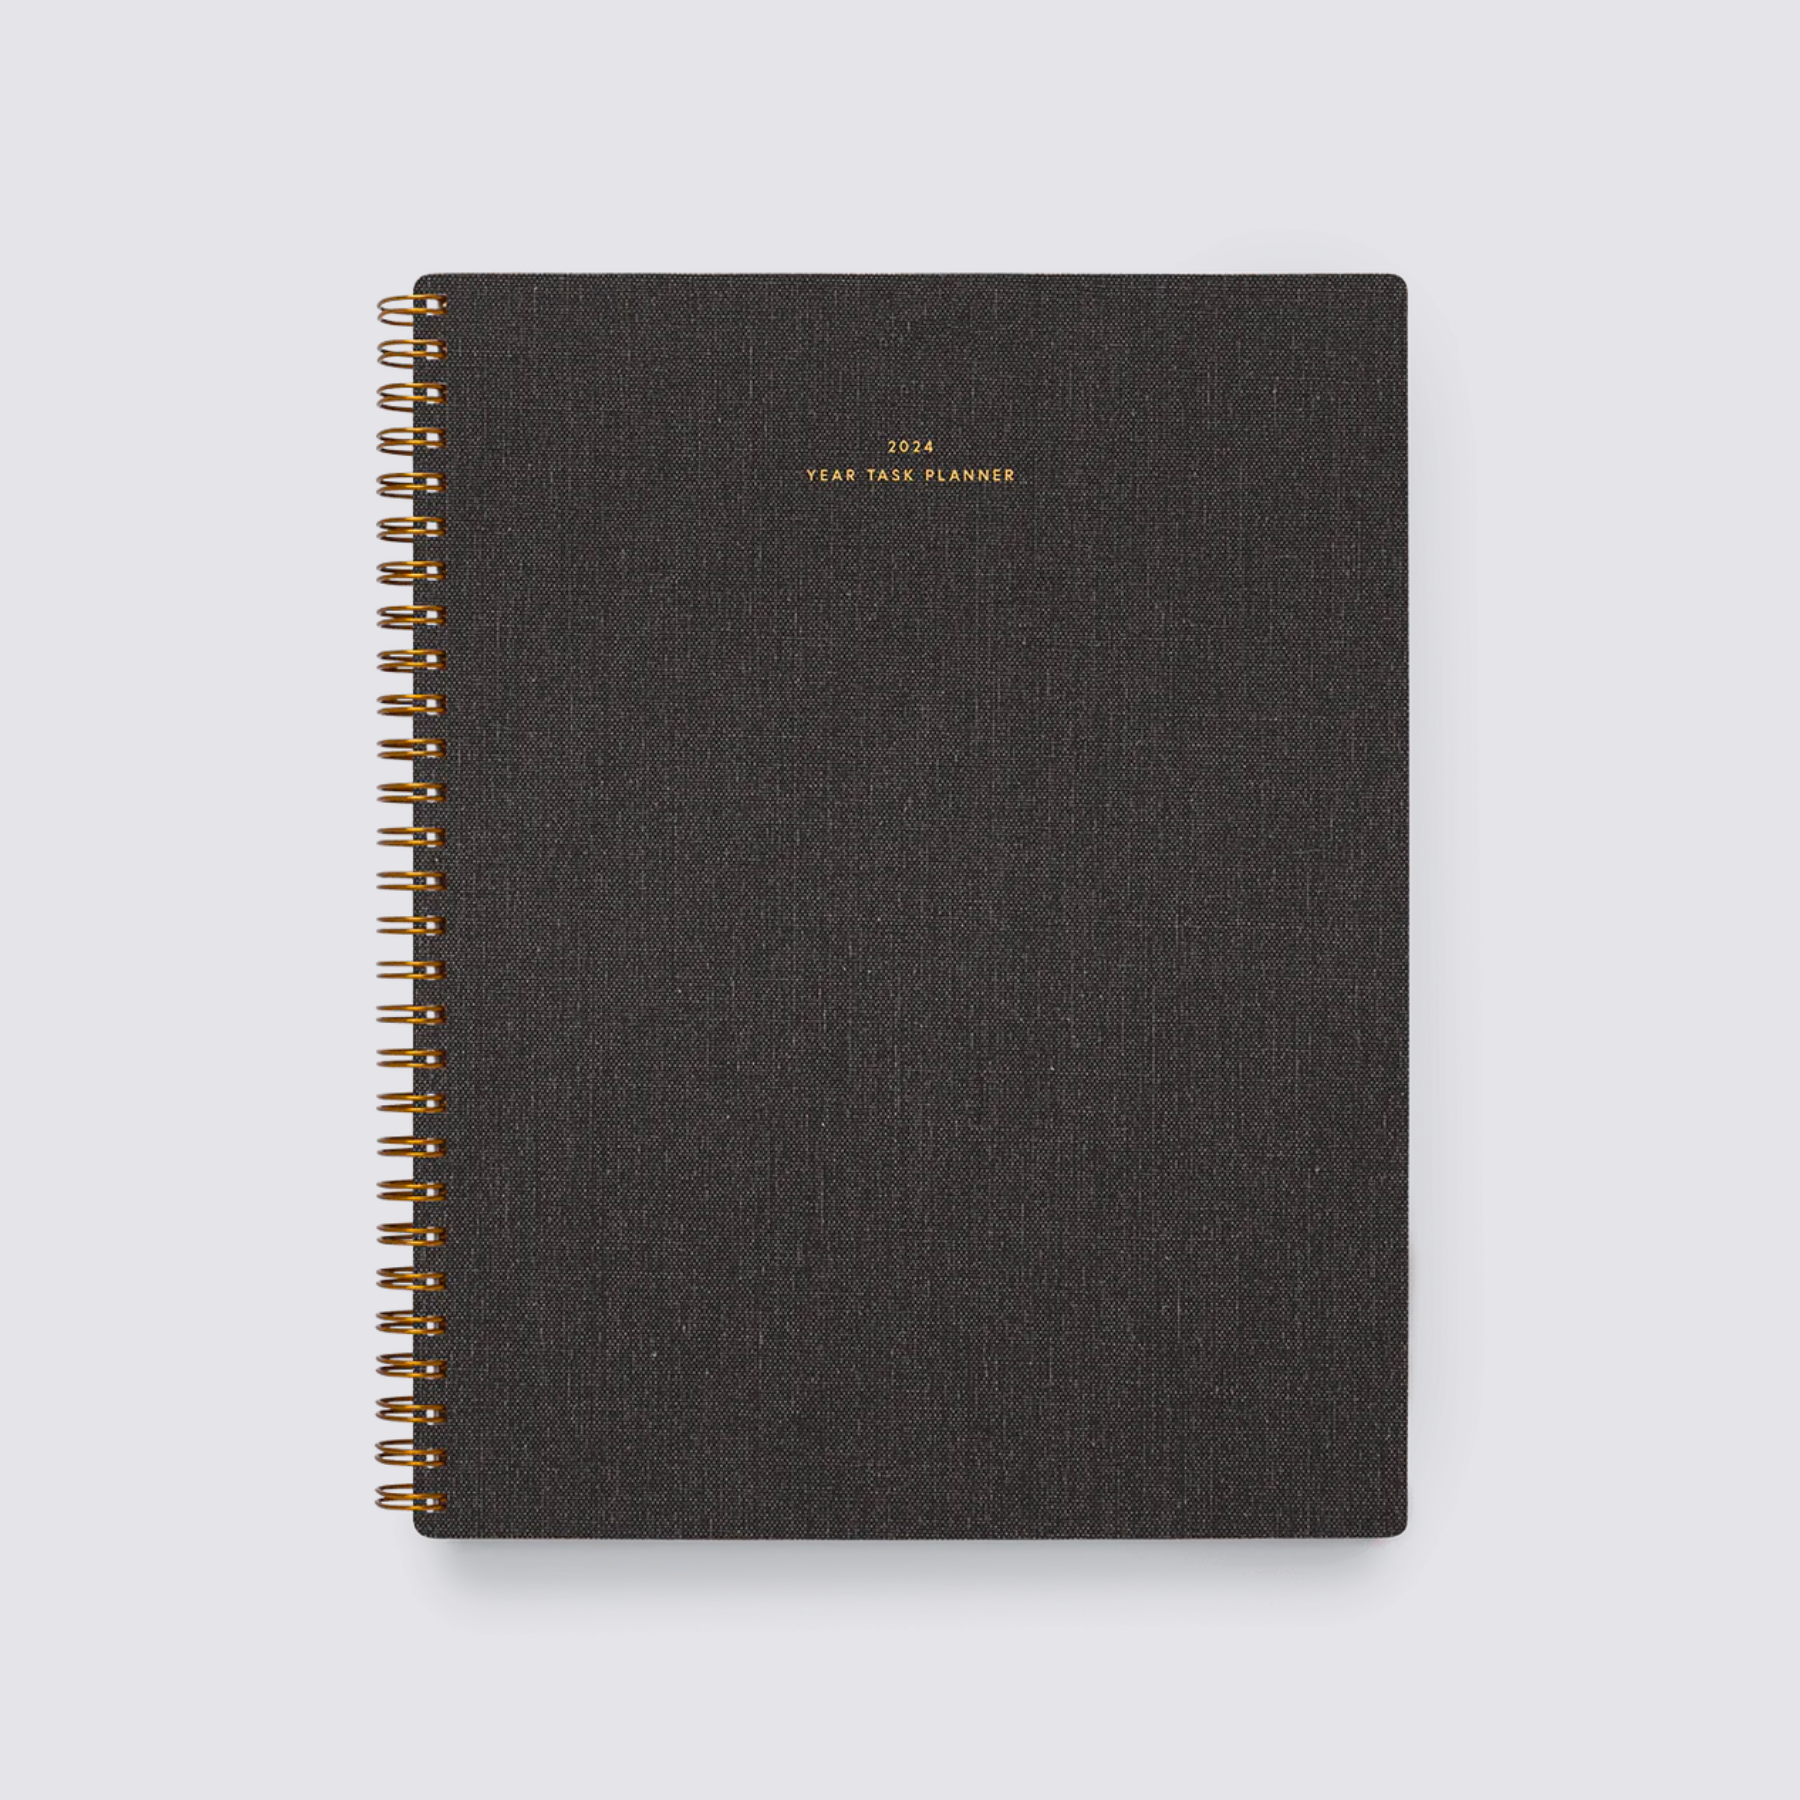 Sharing the 2024 Louis Vuitton Agenda Refills for the Daily Small